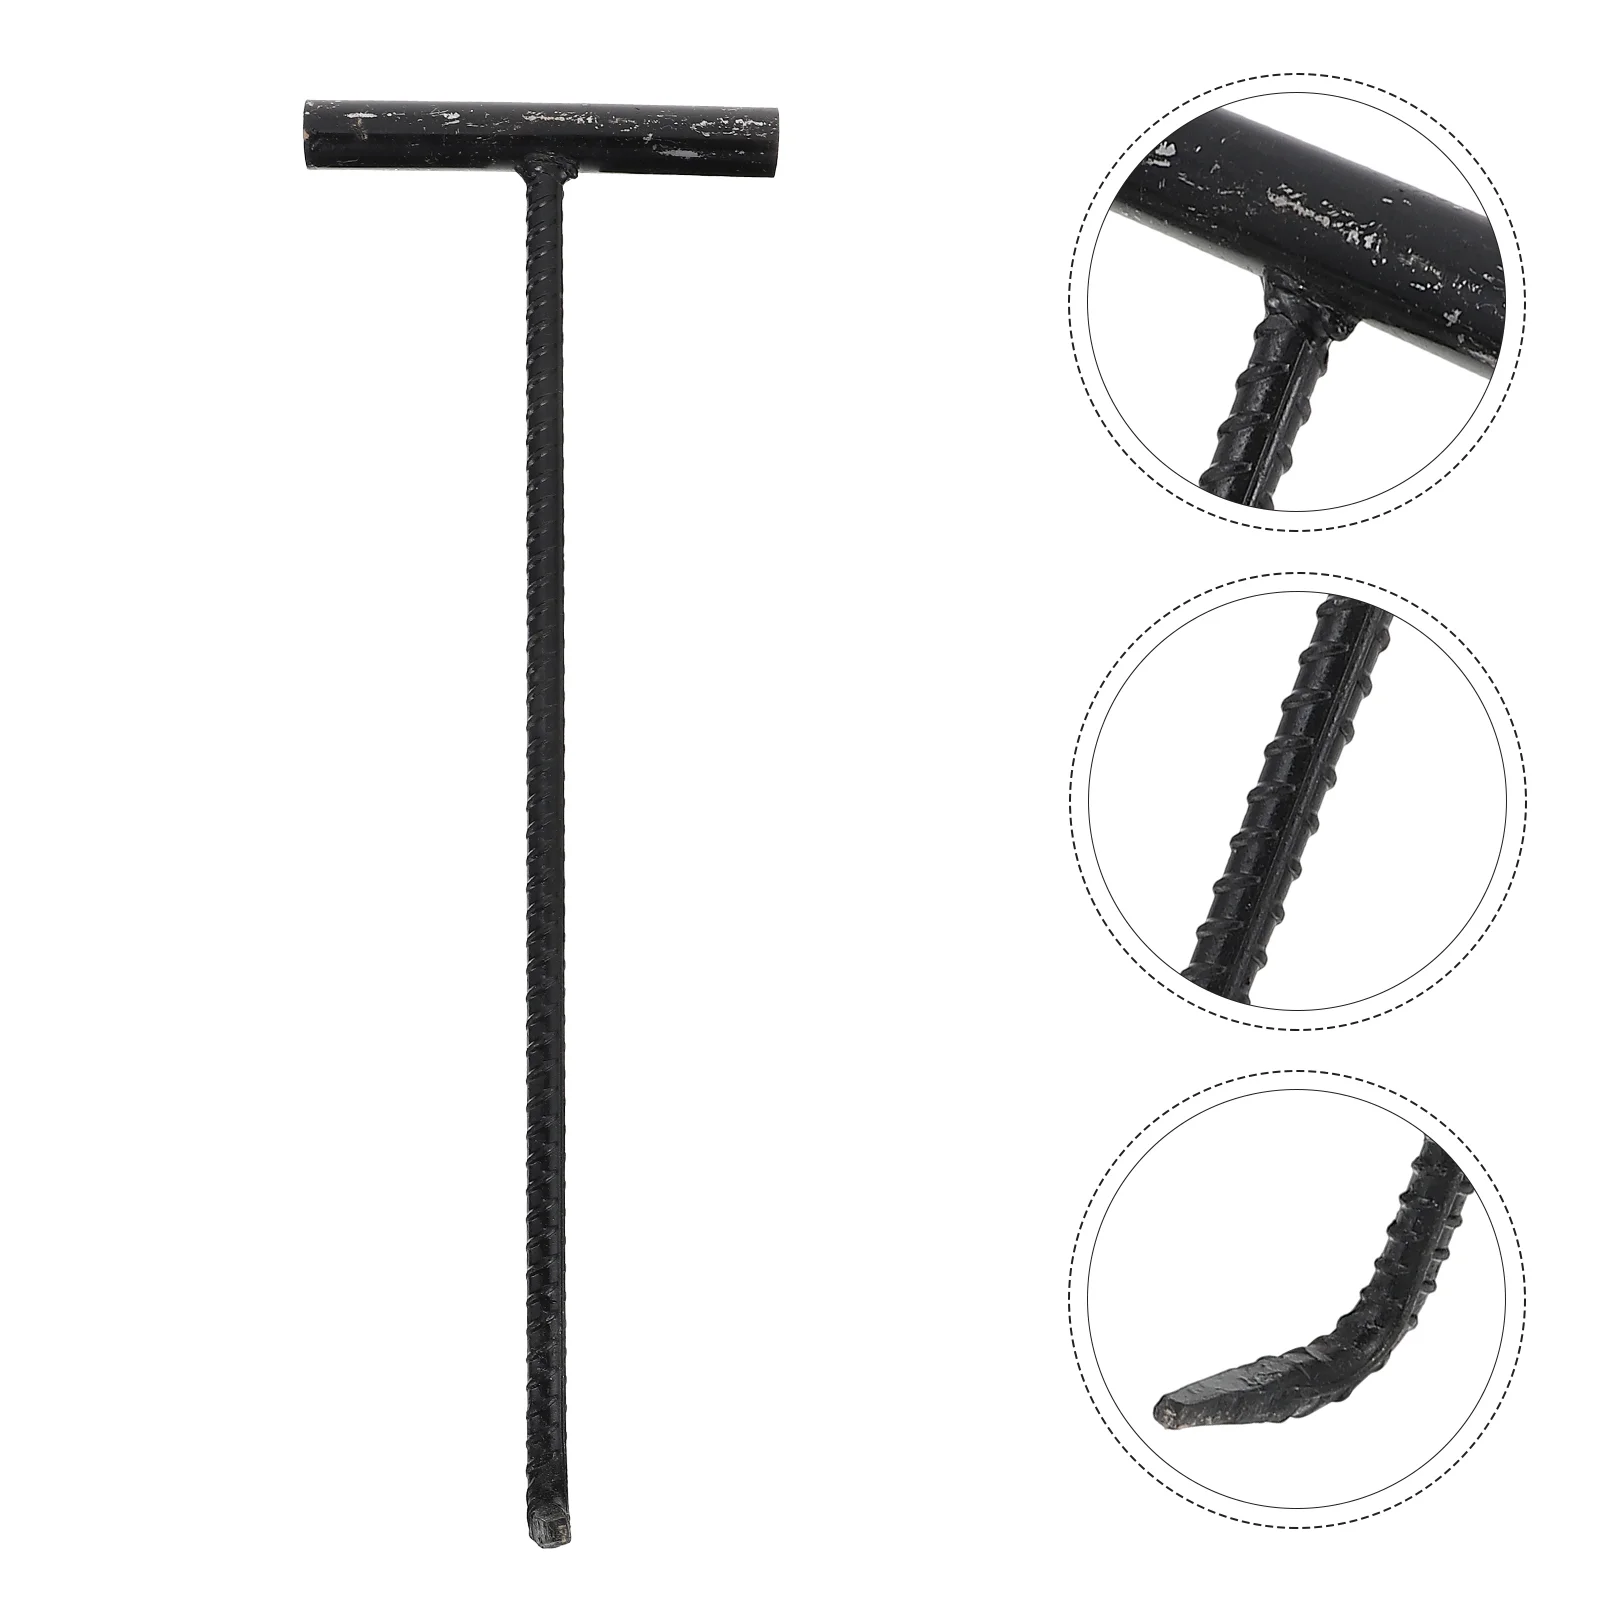 

T-hook Hooks Hanging Heavy Duty Door Lifting Gadget Manhole Cover Lifter Tool Sewer Pull Steel